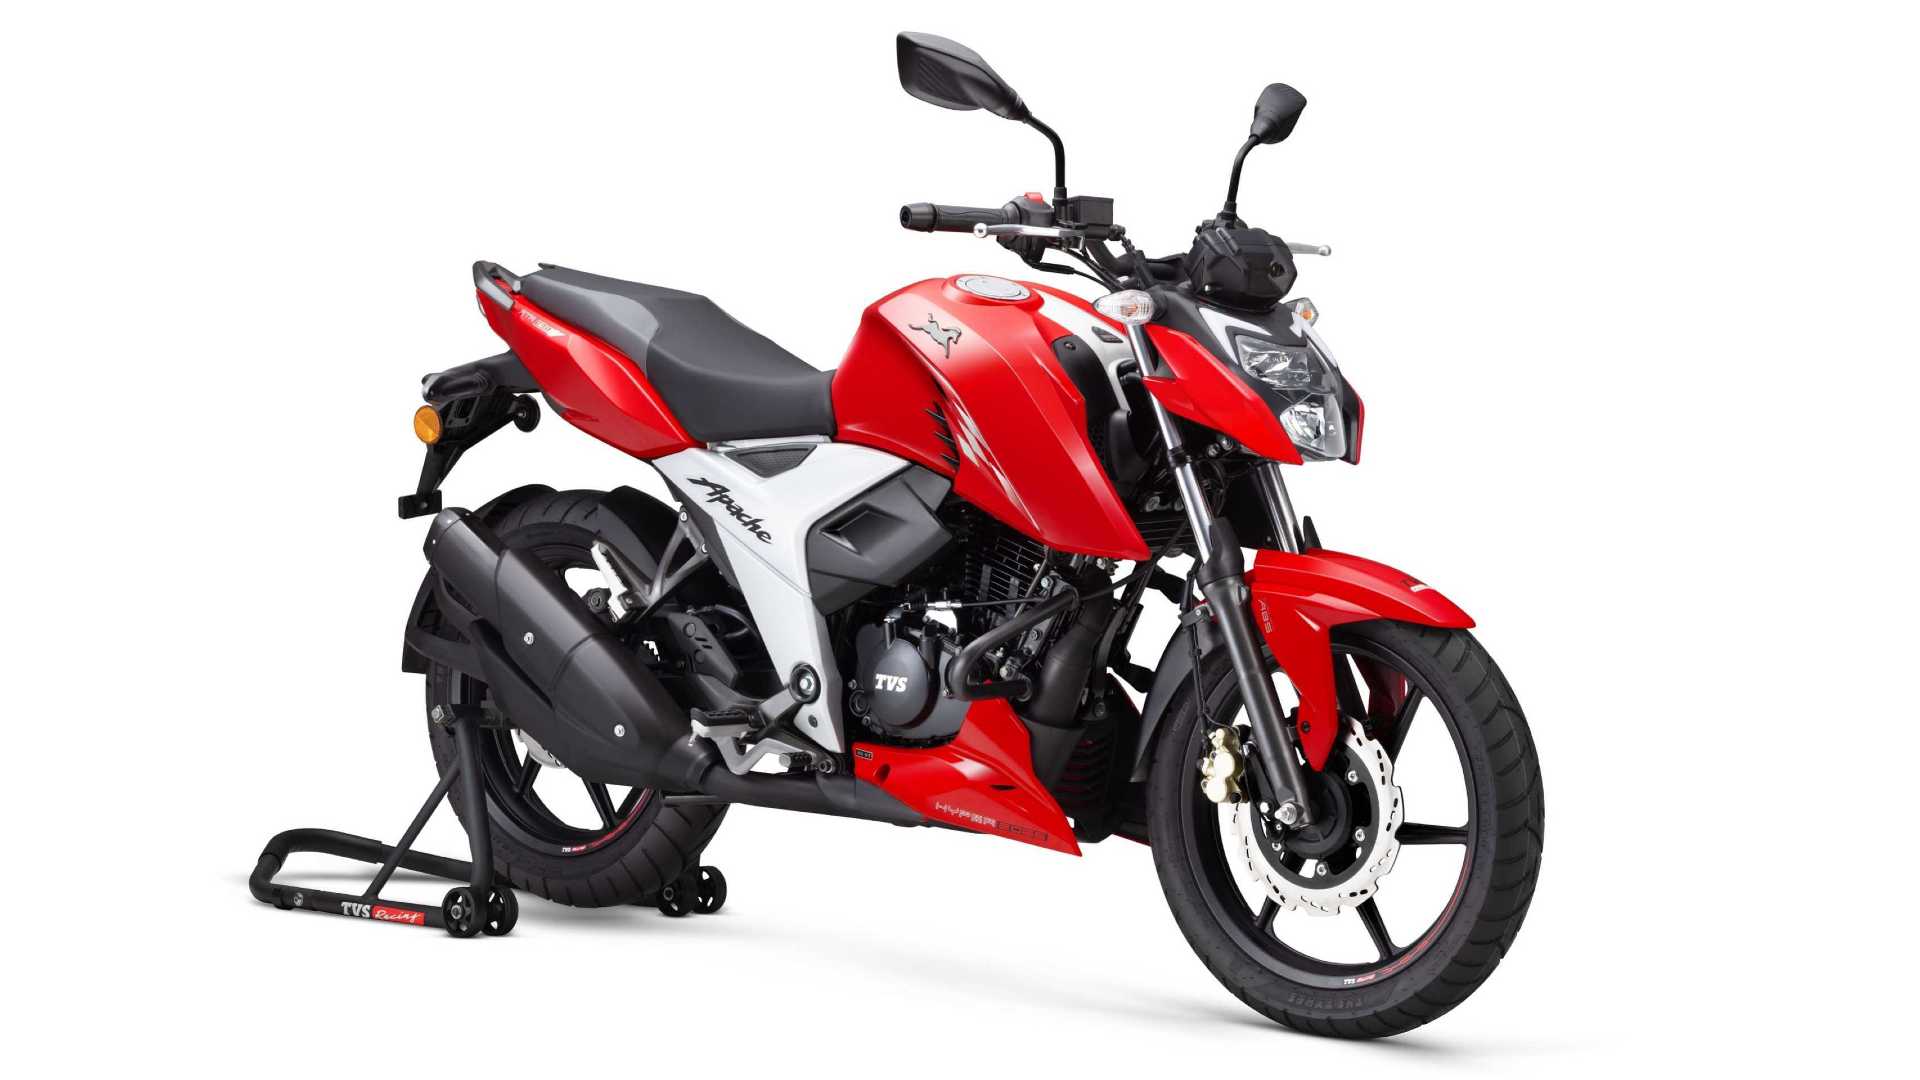 The Updated Tvs Apache Rtr 160 4v Is Now Available In 1 07 Larks Making It Lighter And More Powerful Technology News Firstpost Ohio News Time